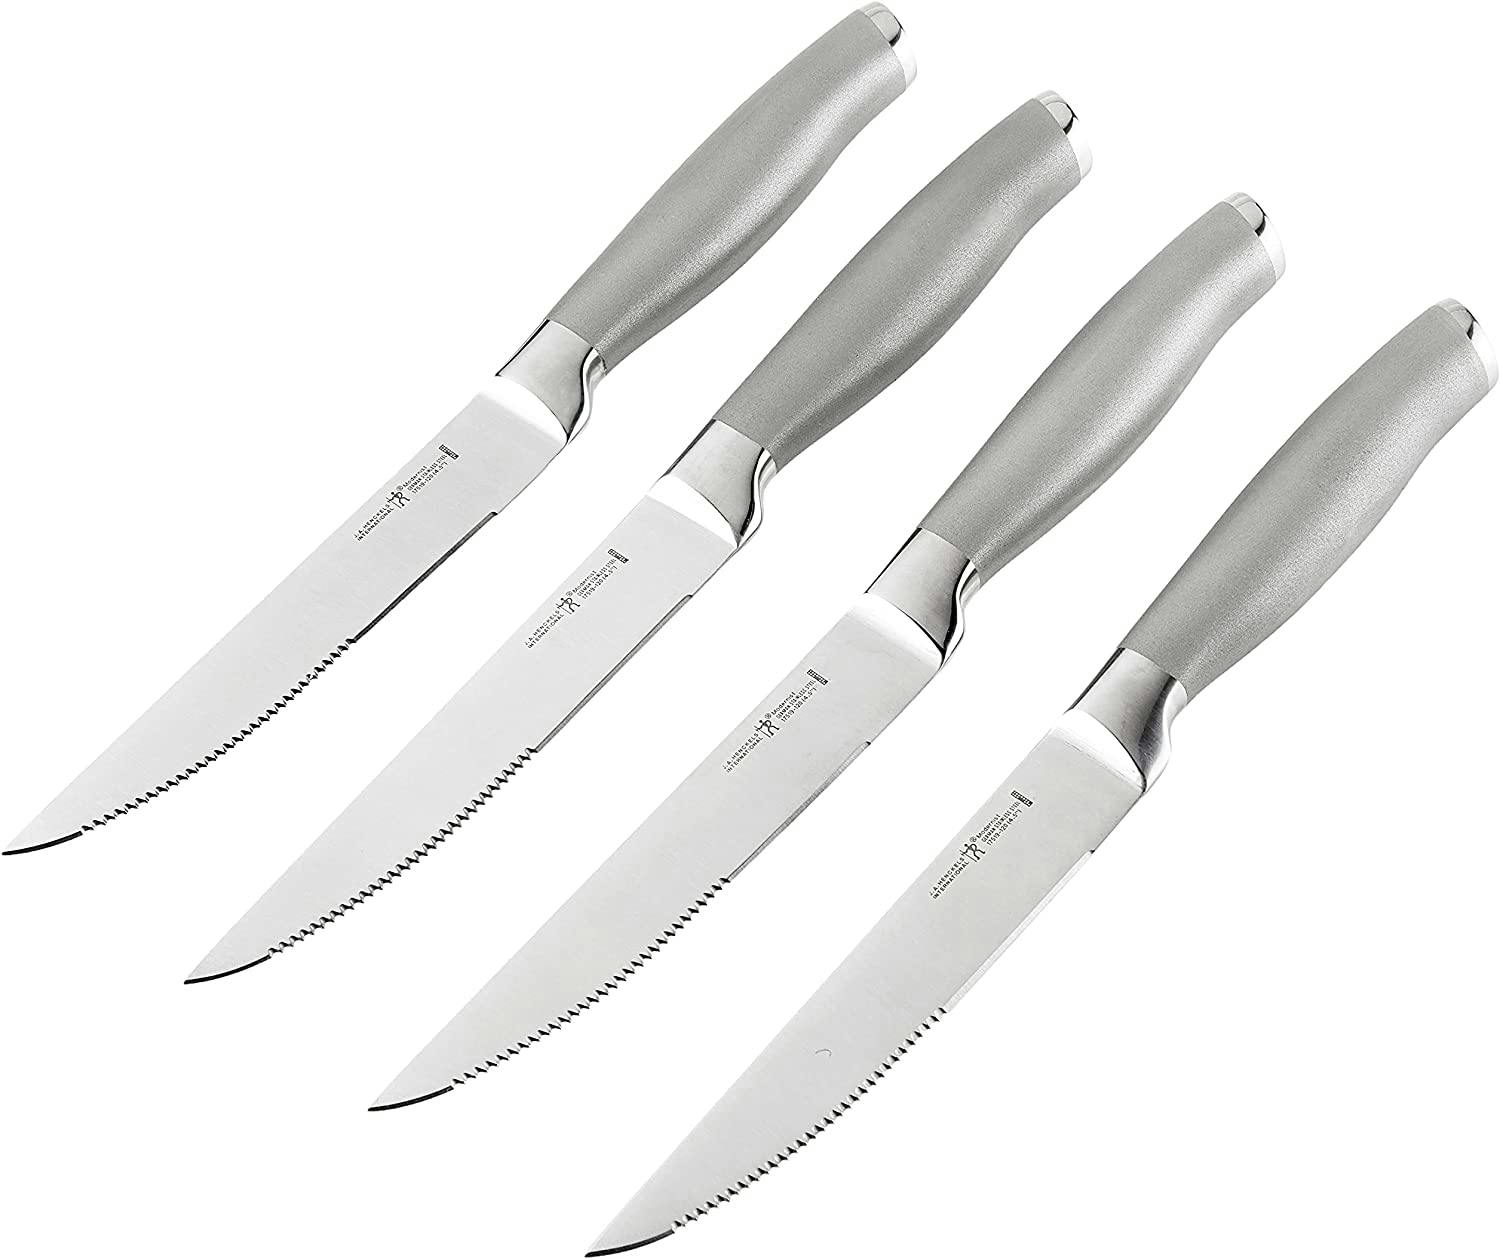 Broil King Stainless Steel Steak Knives Cooking Accessory (4-Piece